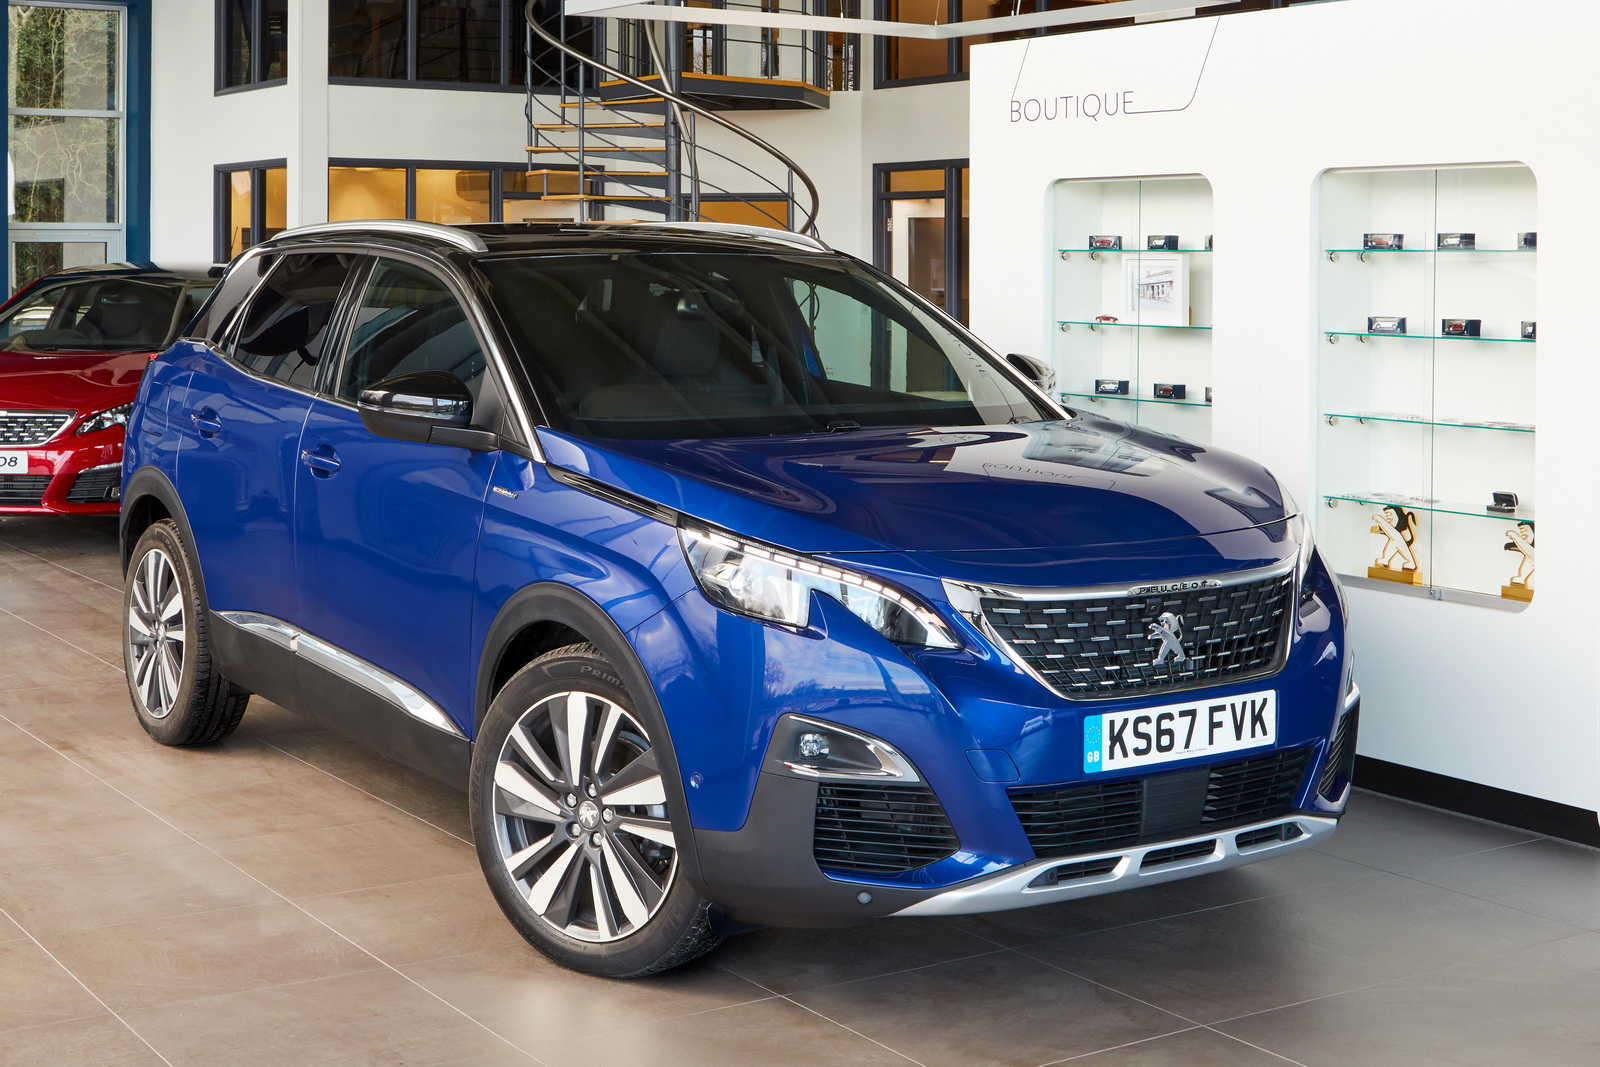 Peugeot Uk Launches Gt Line Premium Trim Level For 3008 And 5008